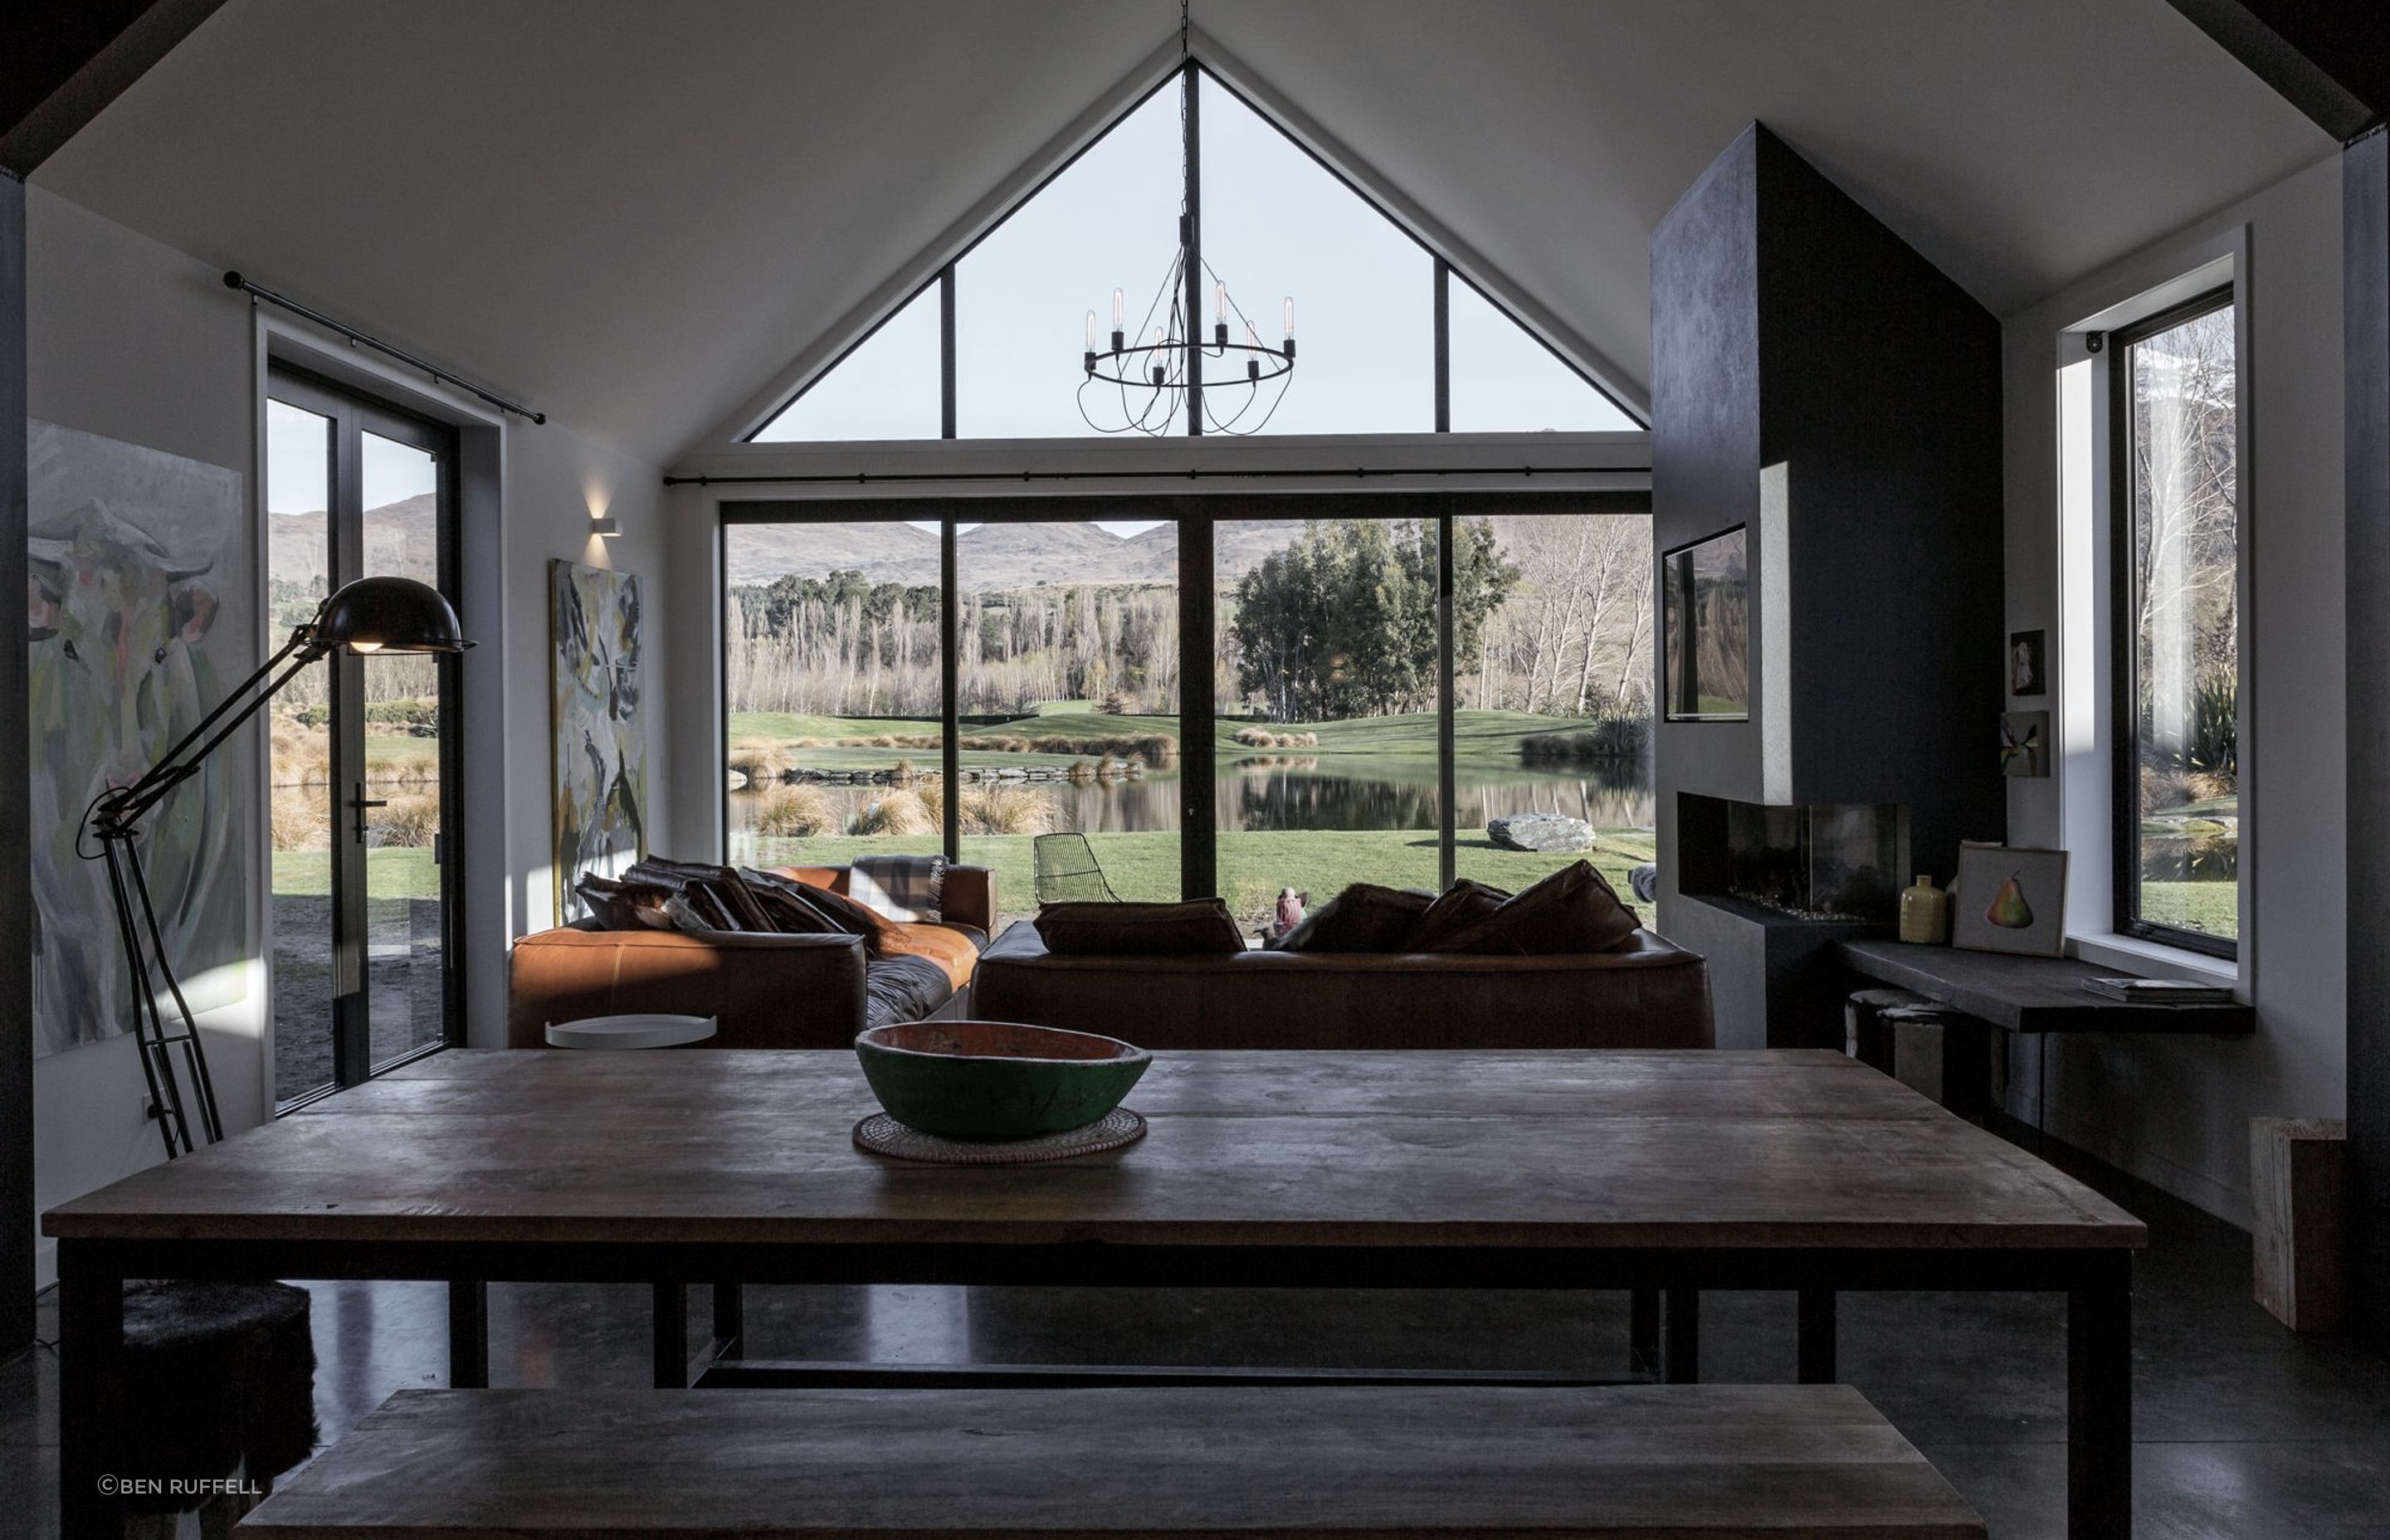 The cathedral ceiling in the open-plan living area gives the space a volumetric presence that references the wide-ranging views through the glazed end wall.